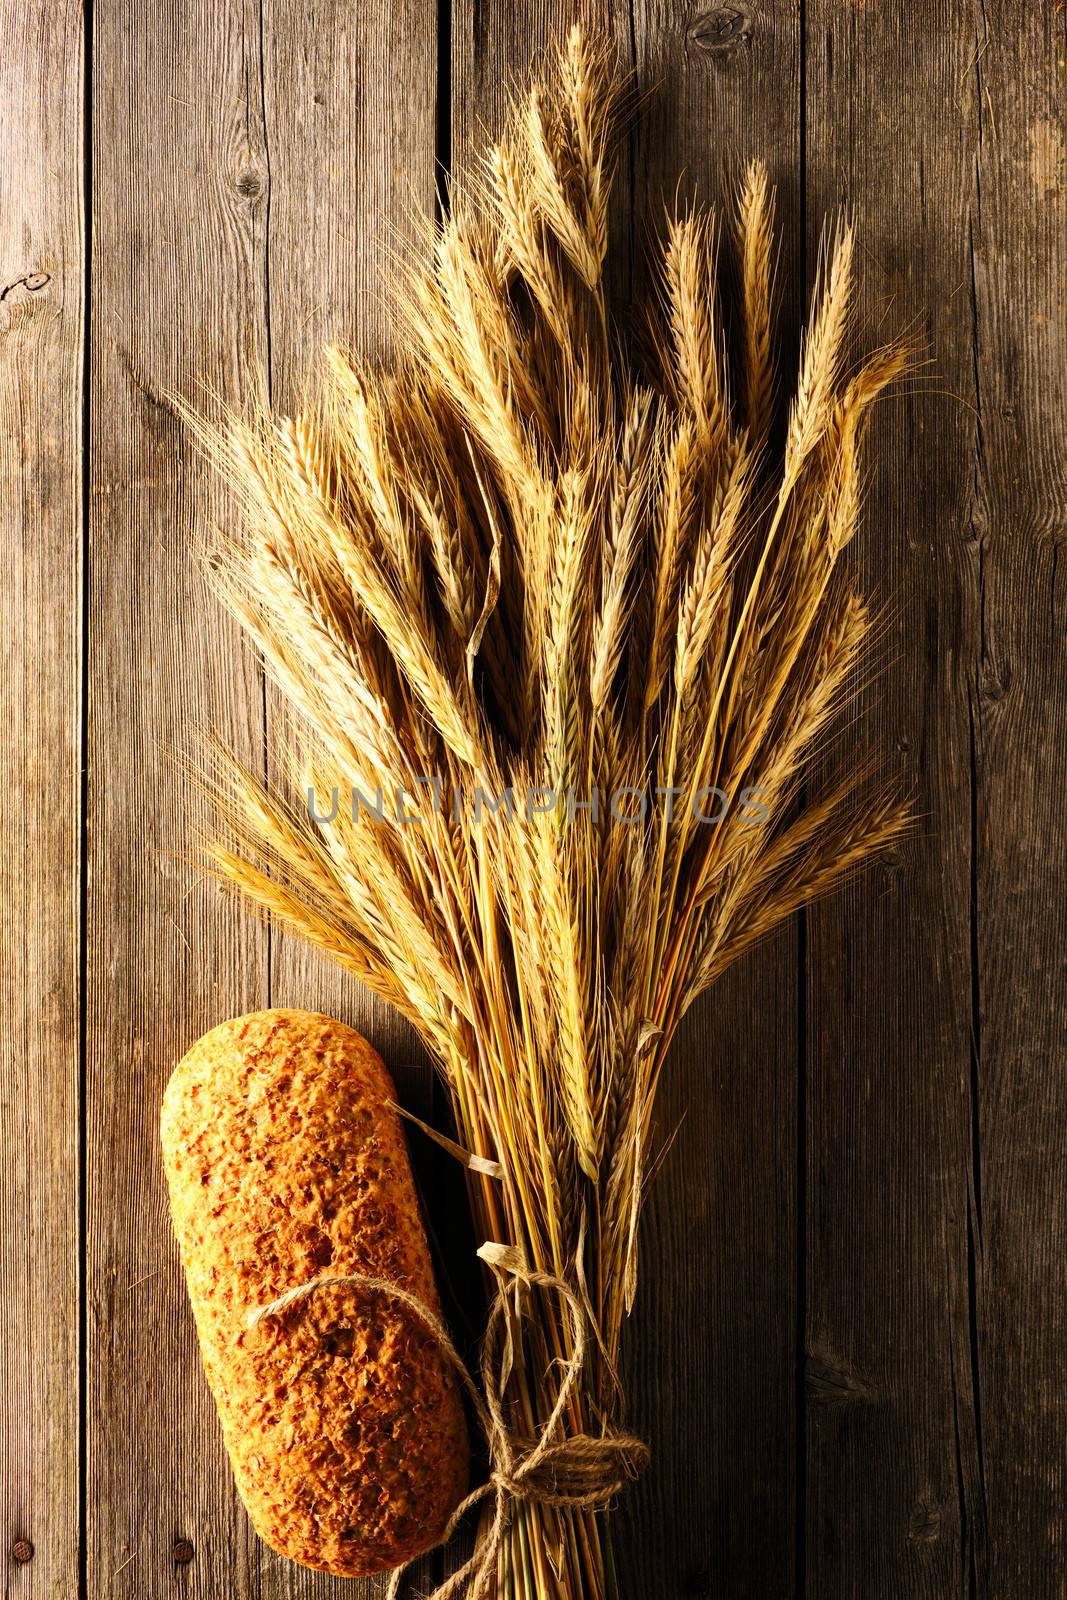 Rye spikelets and bread on wooden background by haveseen